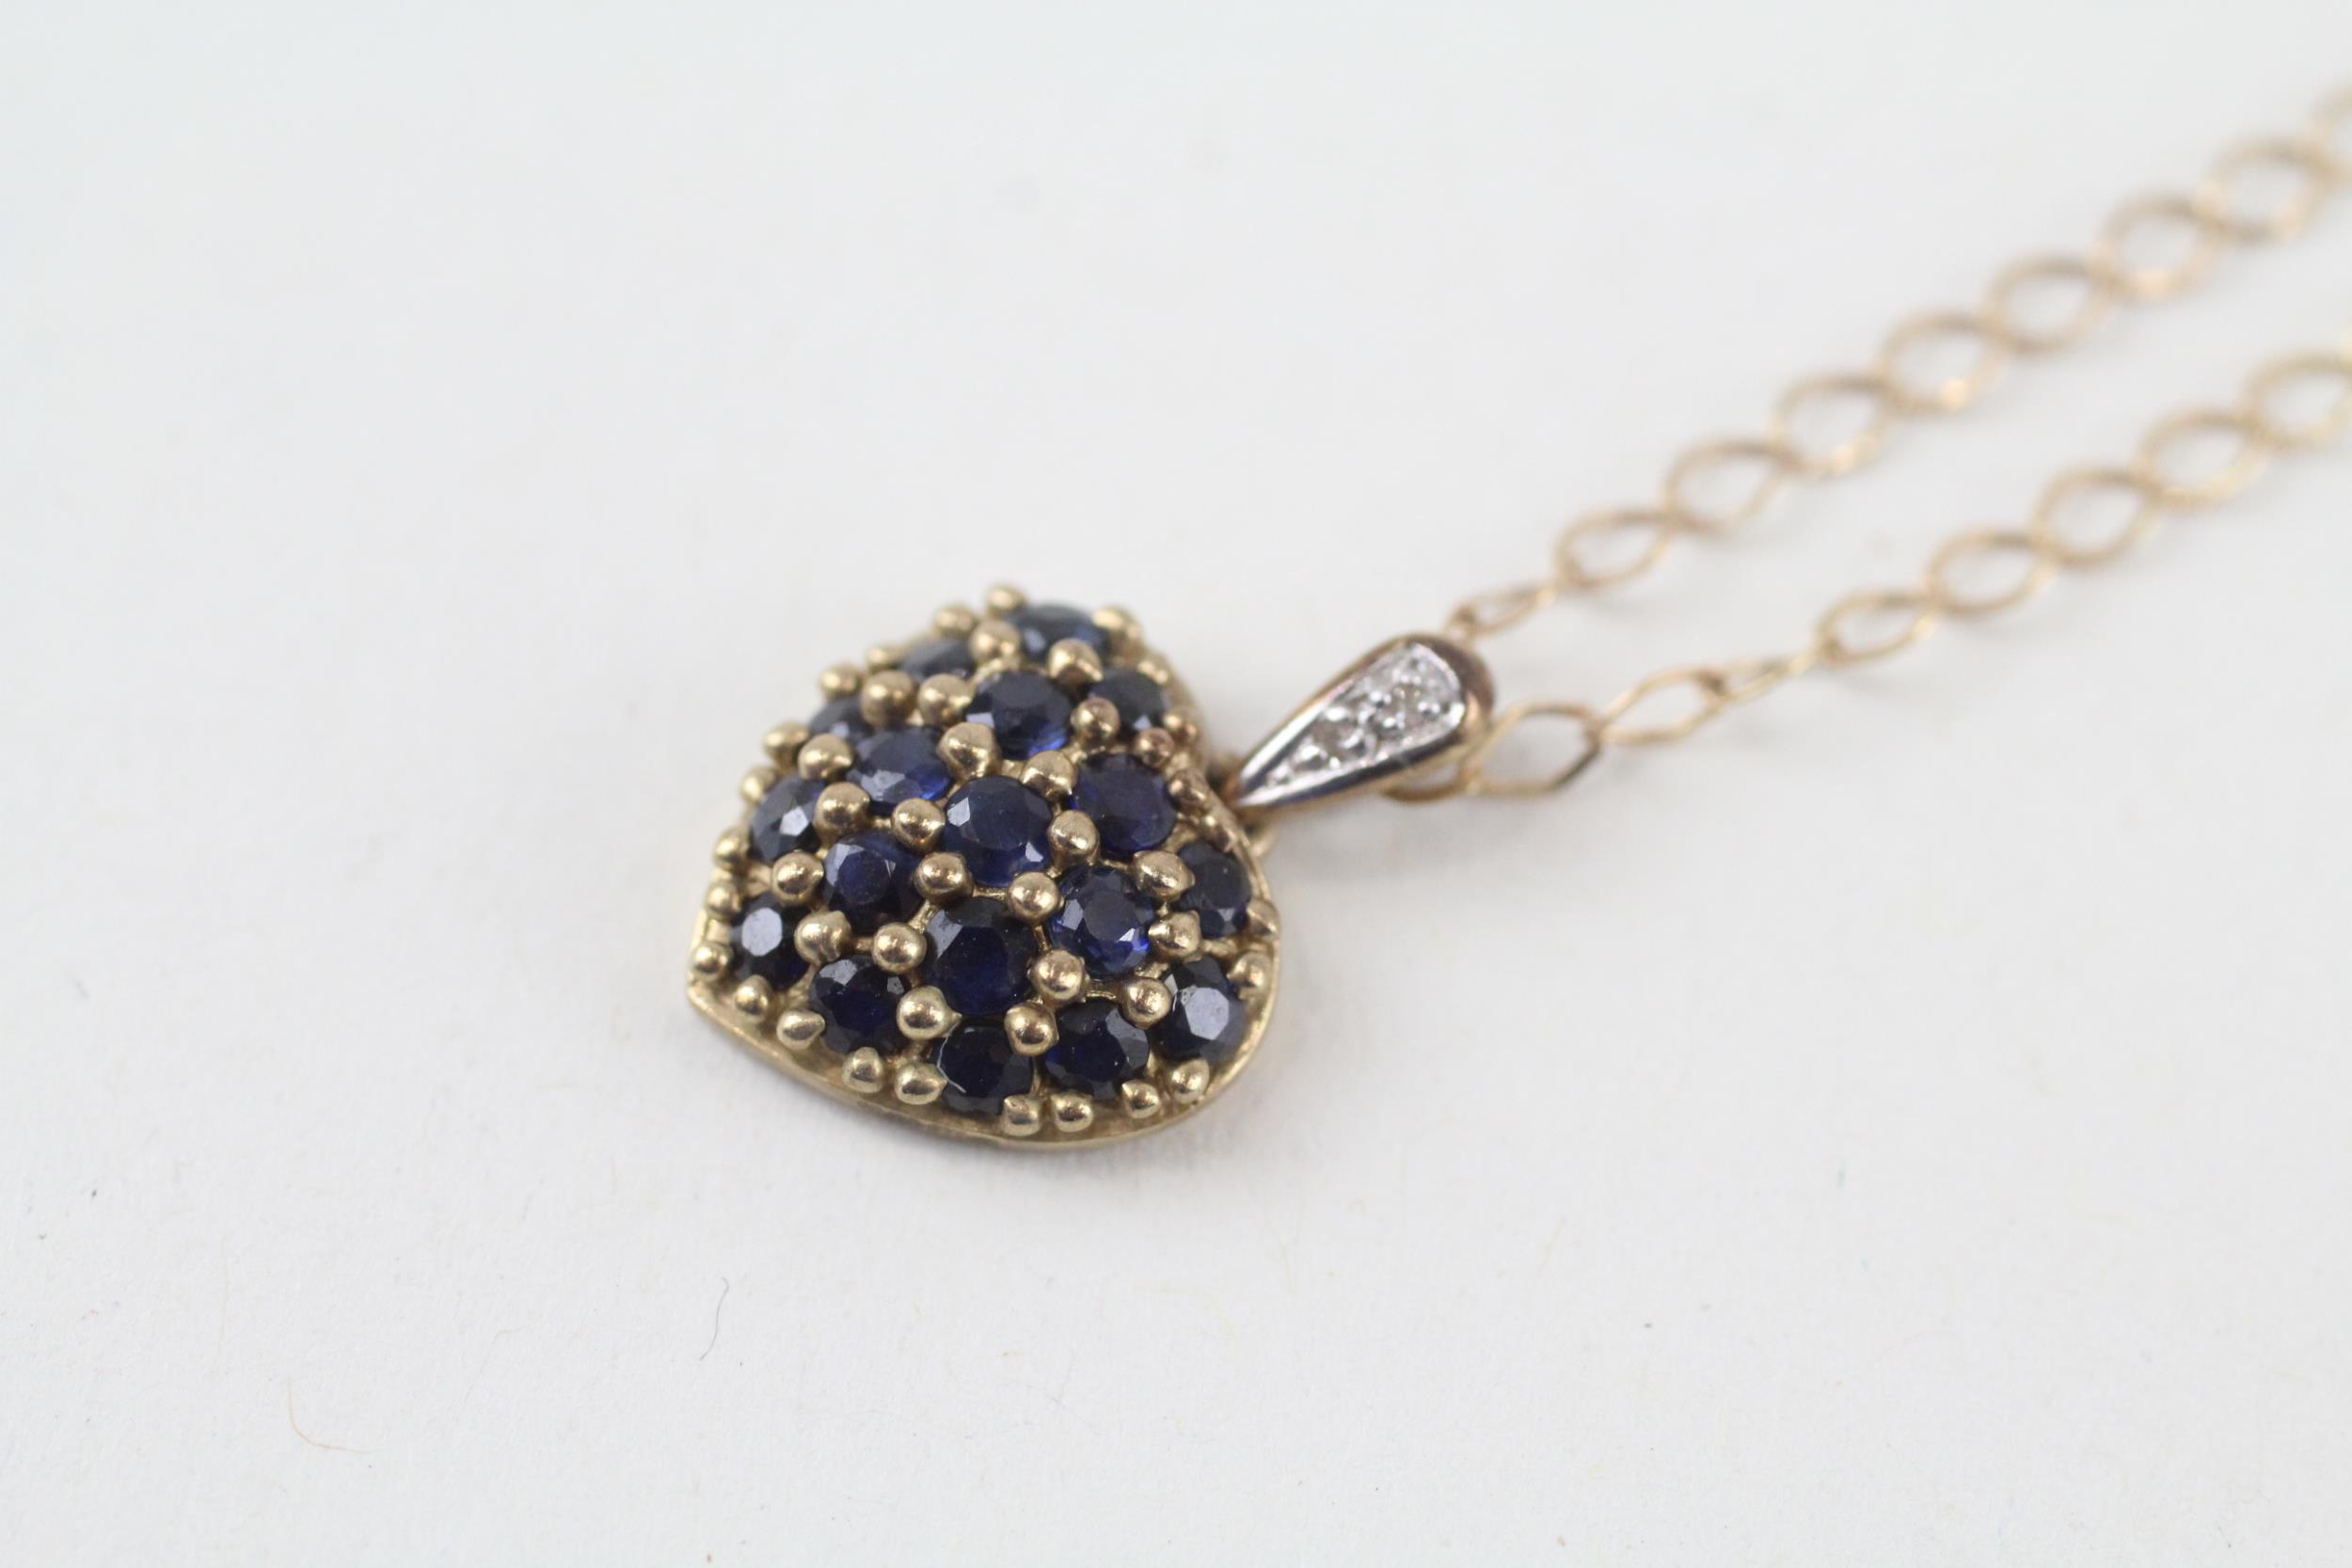 9ct gold vintage sapphire and diamond set heart pendant necklace (2.2g) - Image 2 of 4